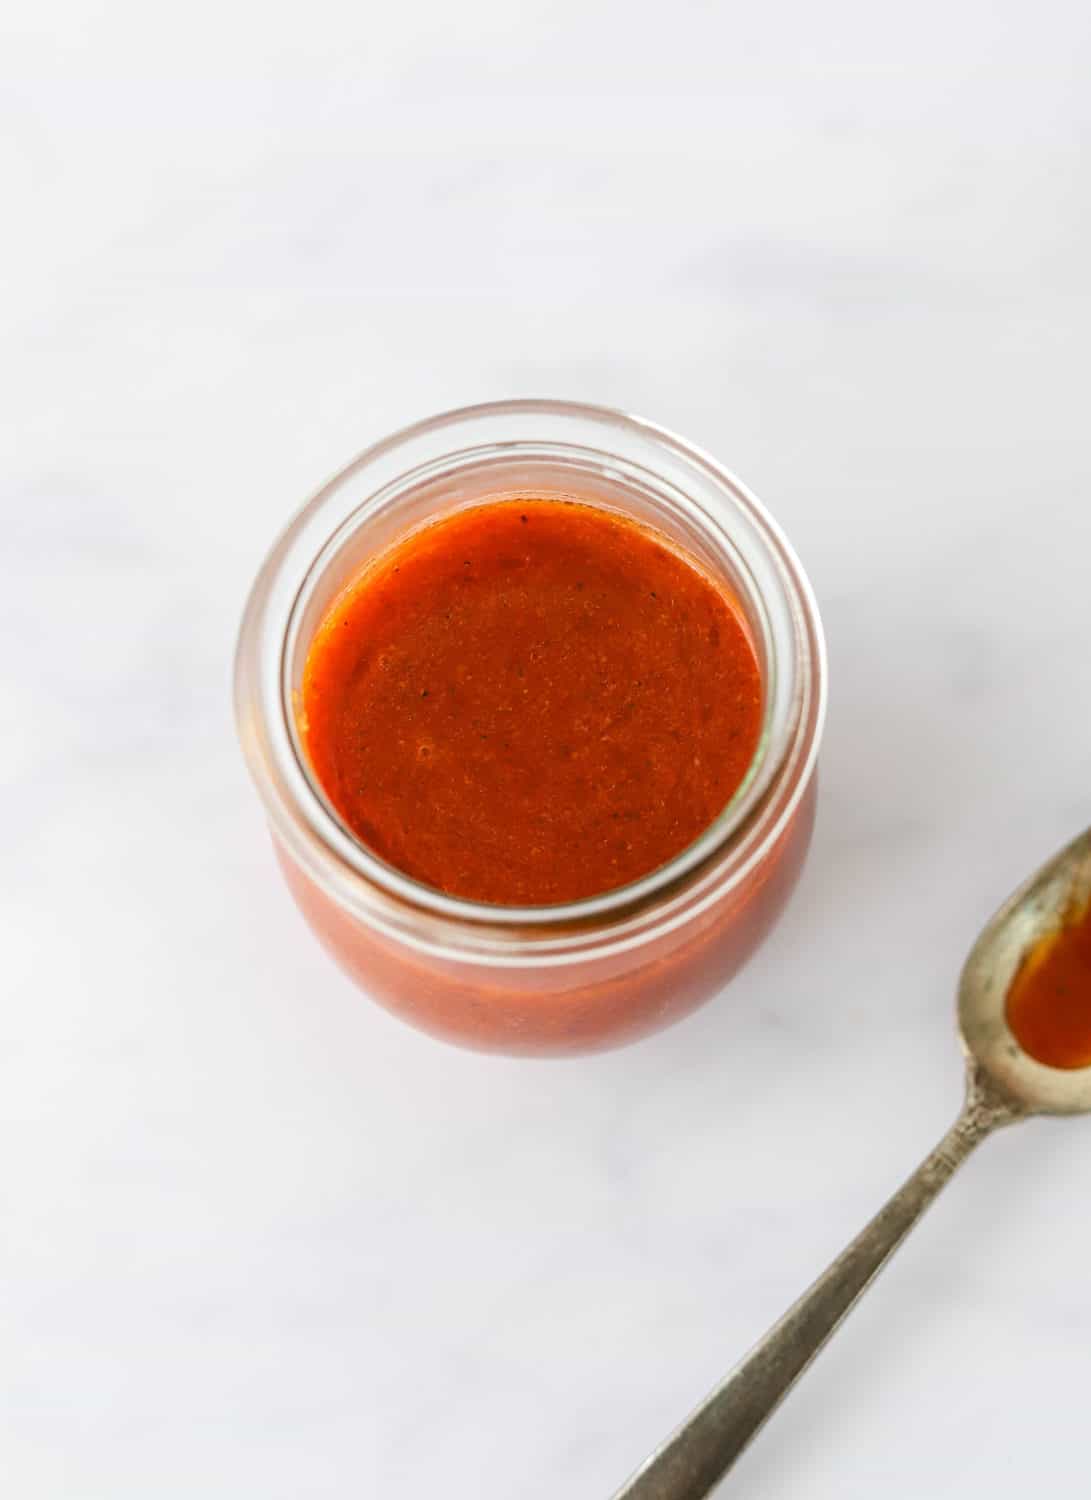 Round, glass jar filled with buffalo sauce with spoon next to it with some sauce on the spoon. 